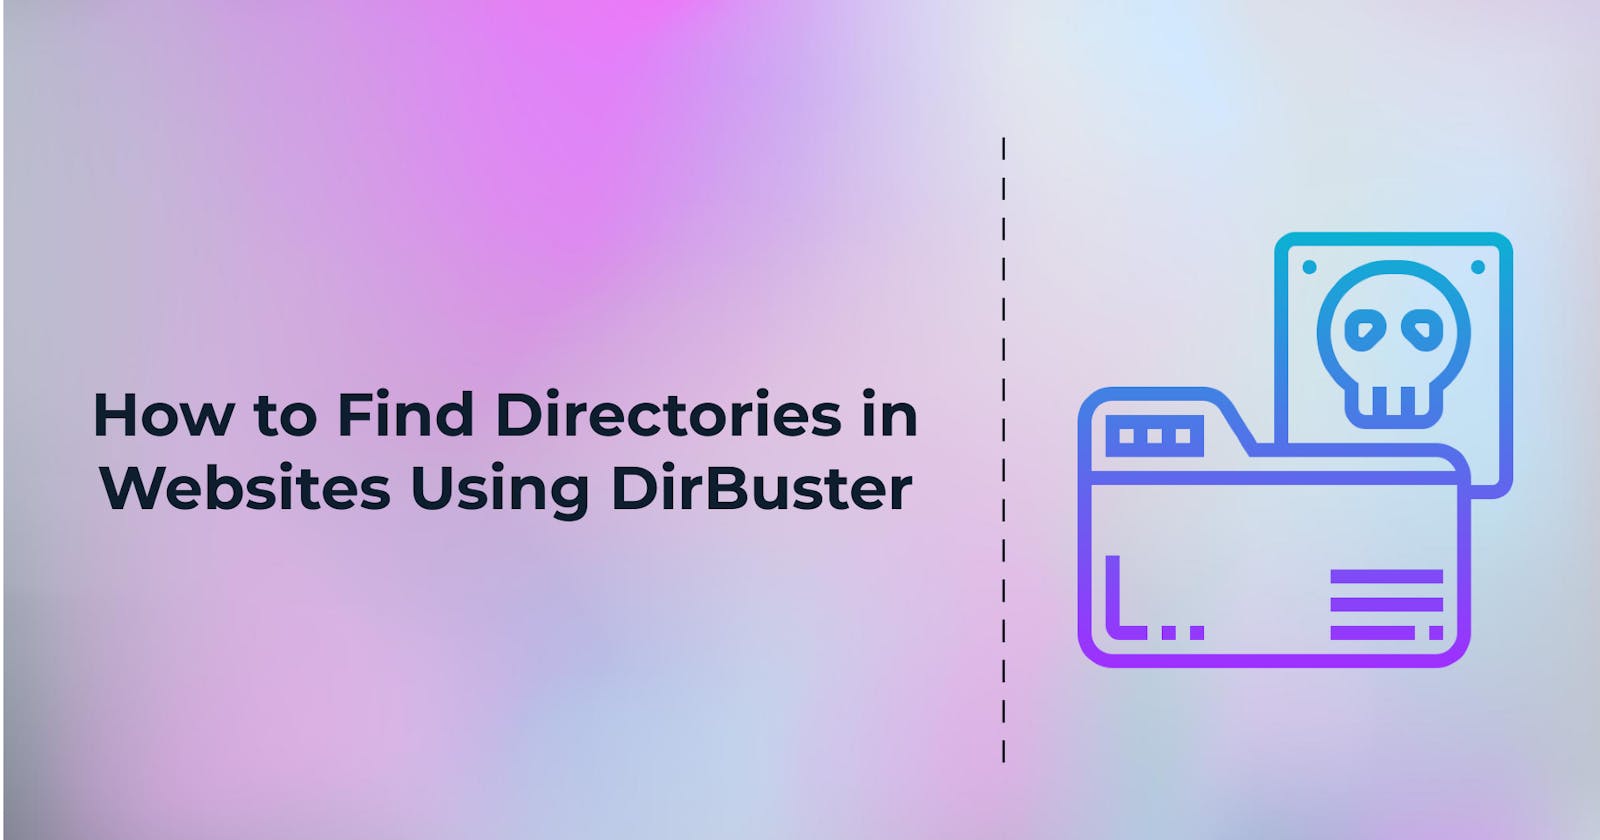 How to Find Directories in Websites Using DirBuster